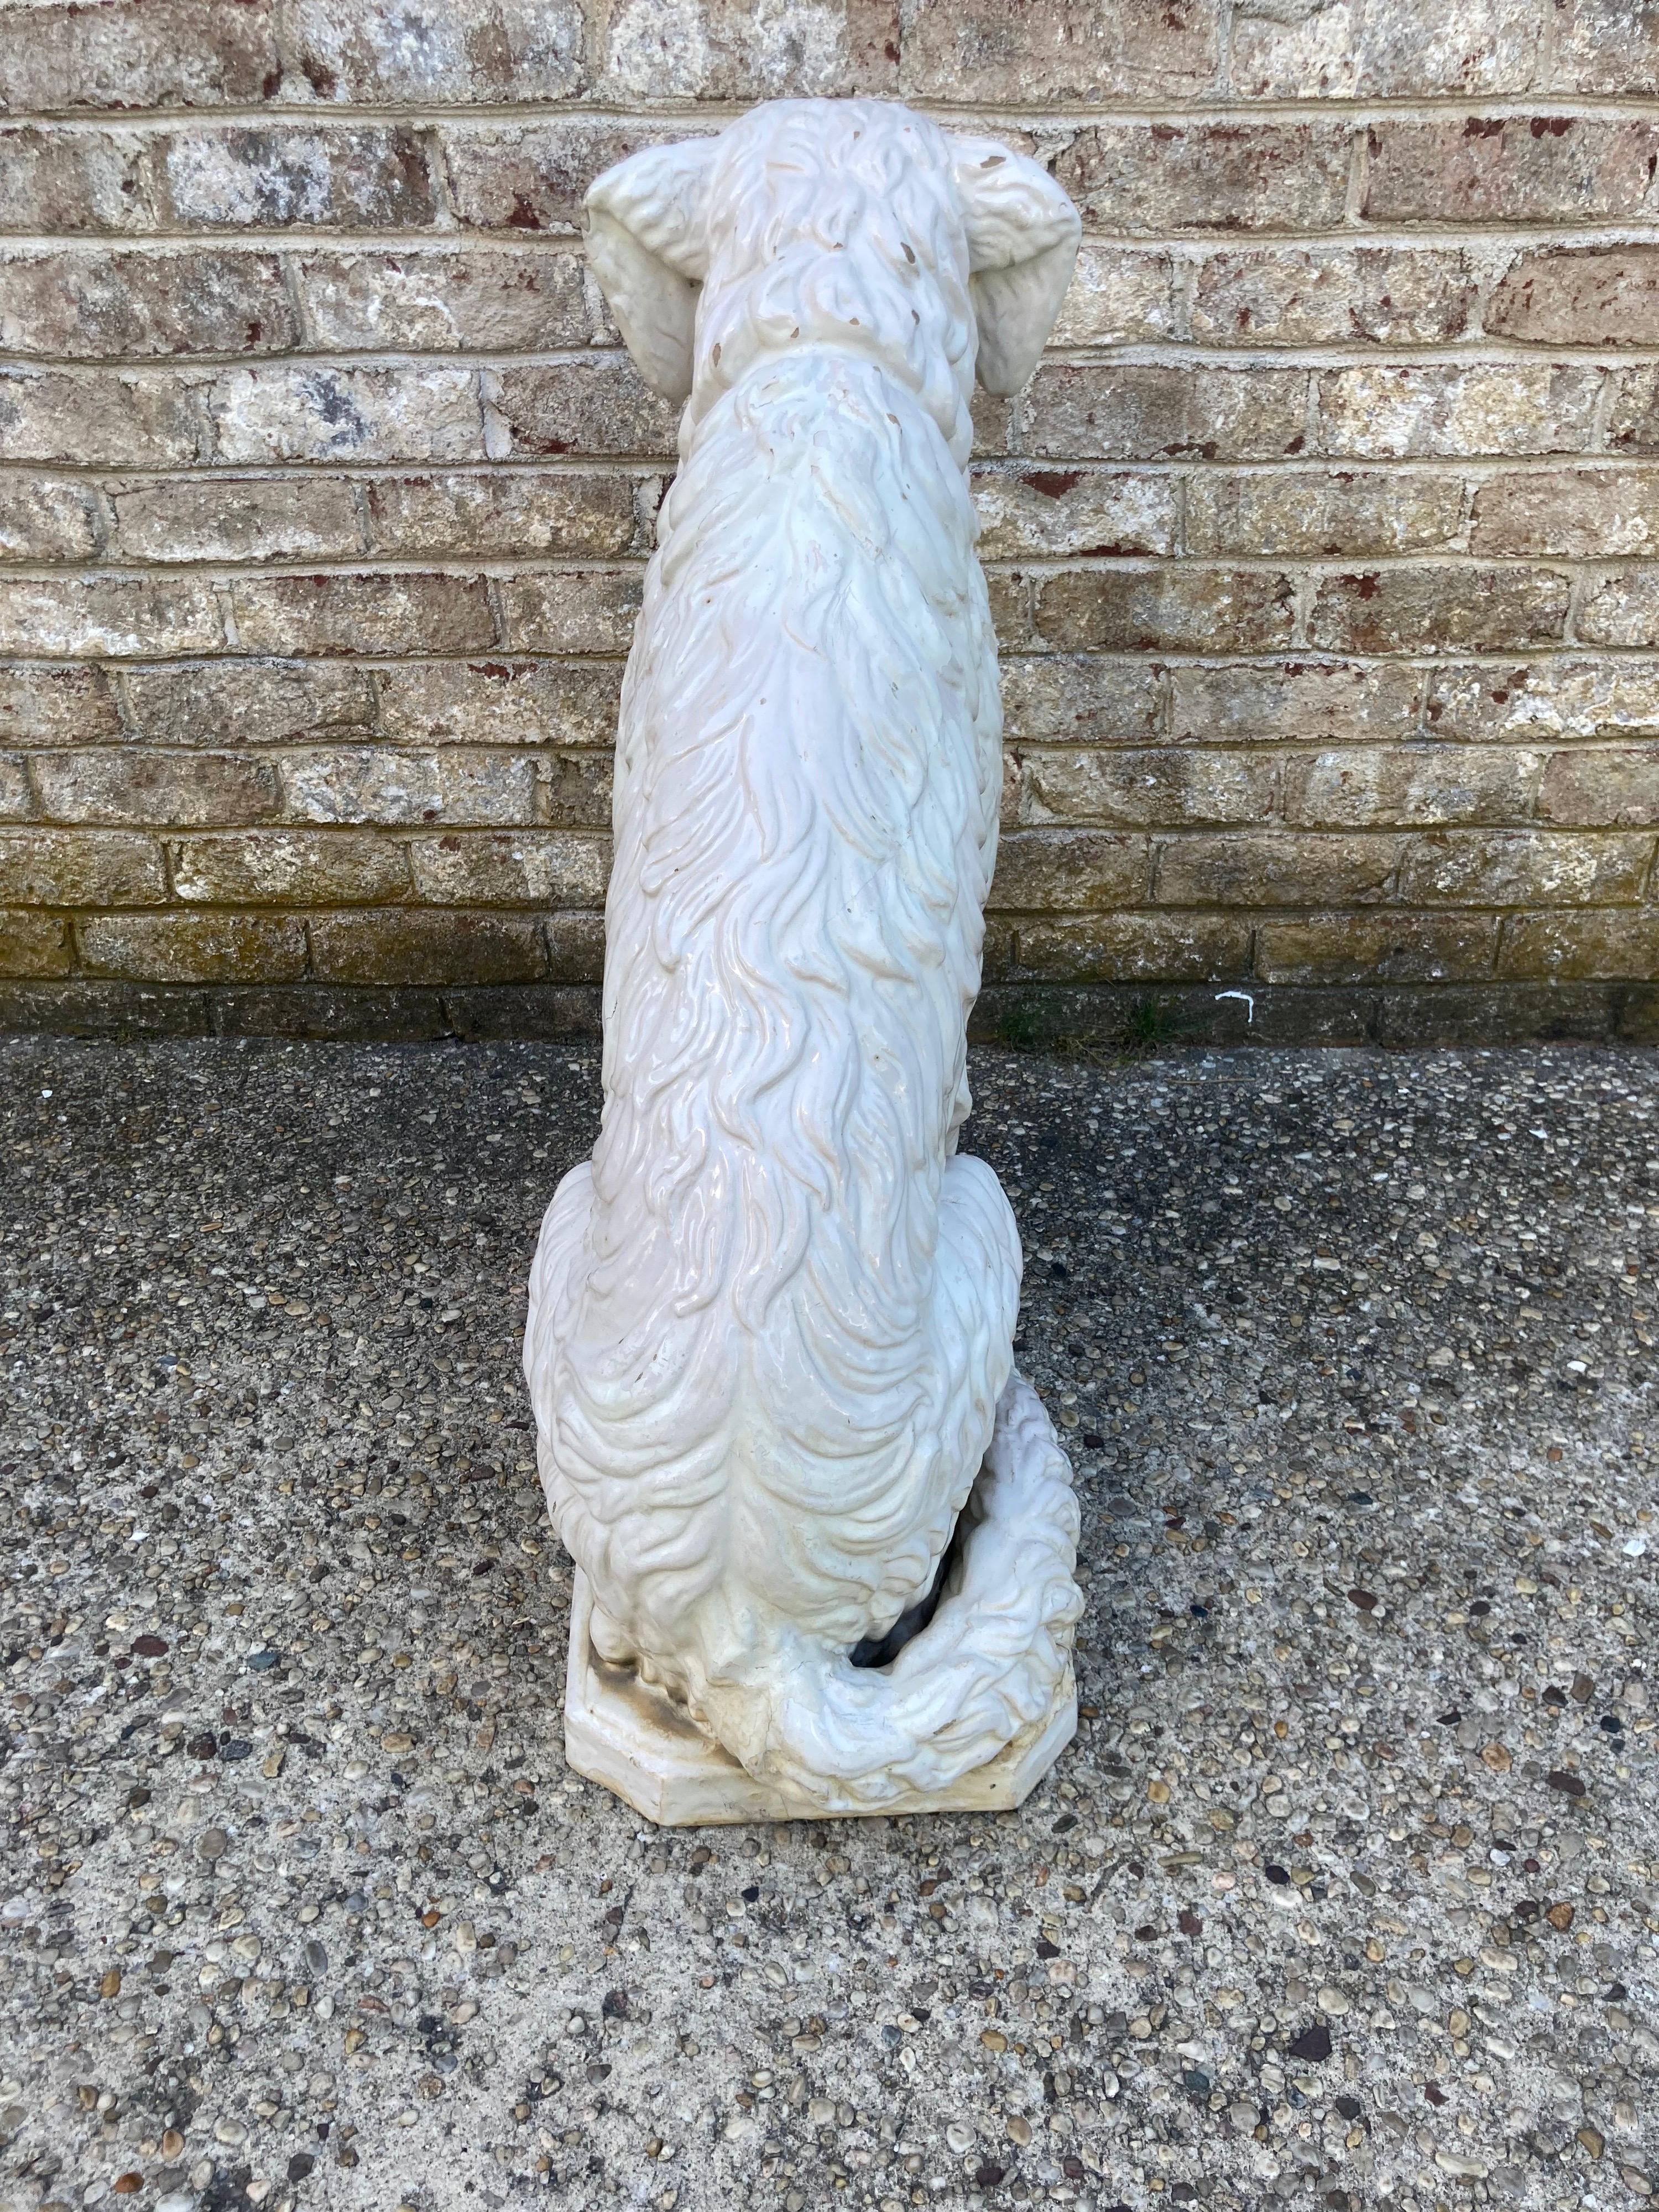 Large Ceramic Dog In Fair Condition For Sale In East Hampton, NY